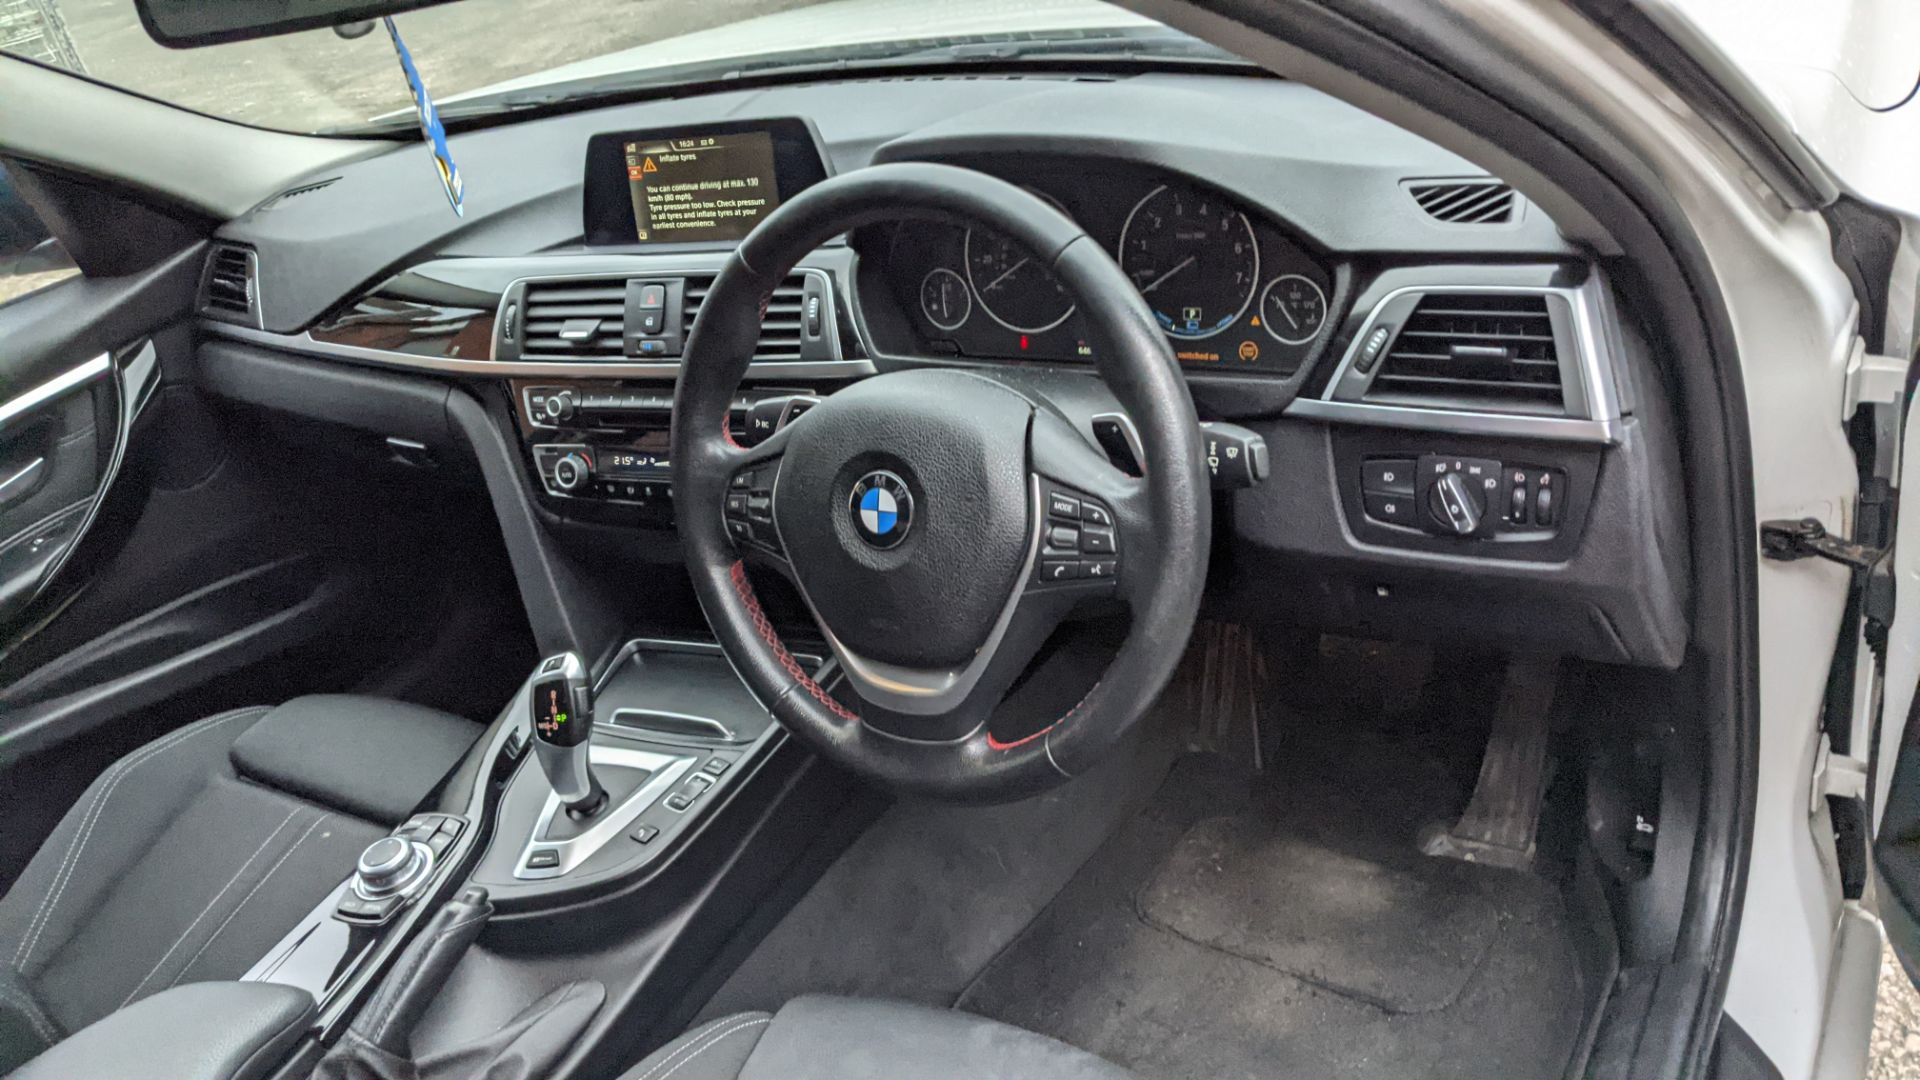 2016 BMW 330E Sport Auto 4 door saloon, 8 speed auto gearbox, PHEV with 1998cc petrol engine. - Image 15 of 66